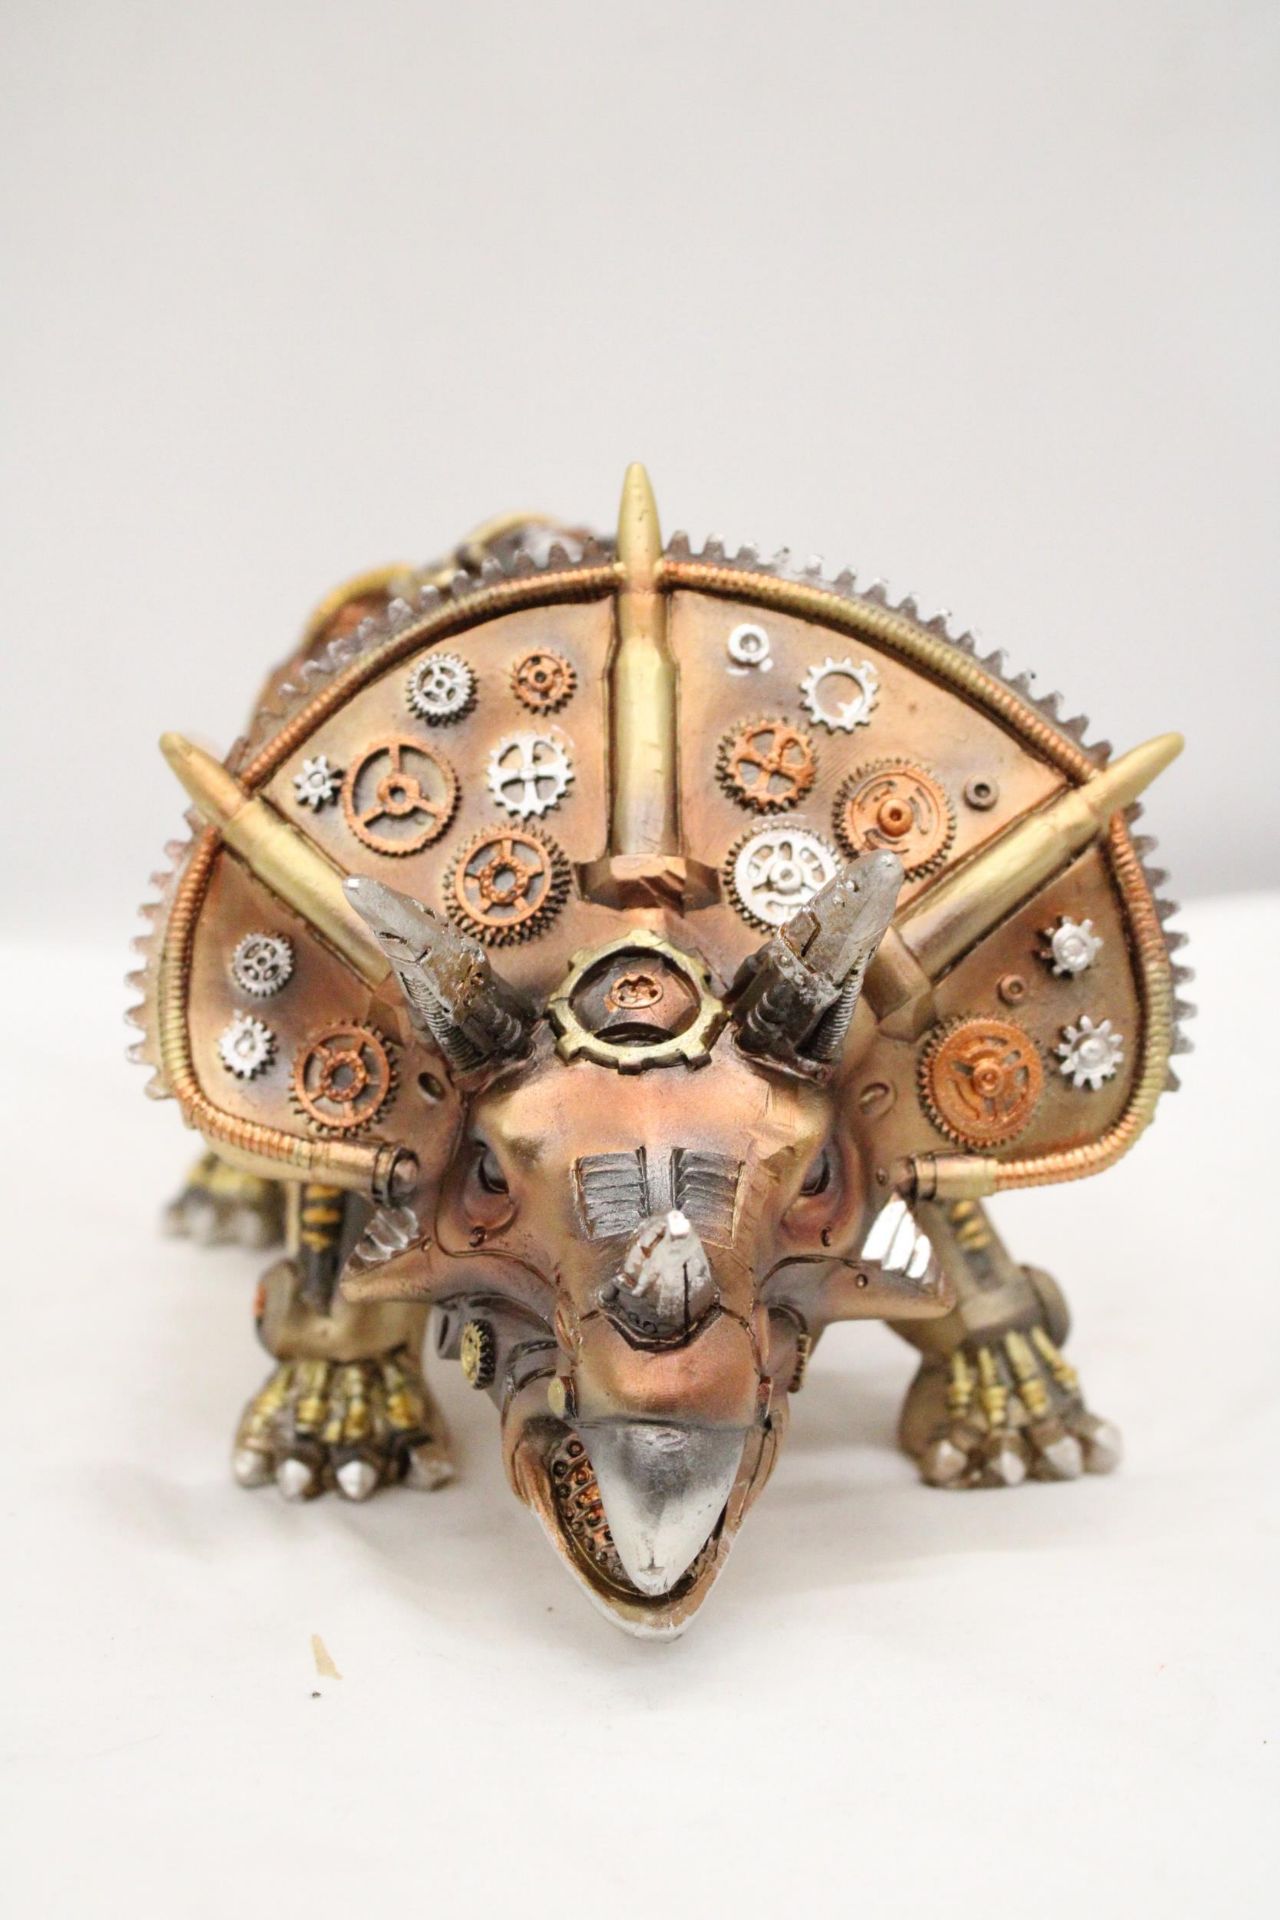 A MECHANICAL STYLE TRICERATOPS - Image 2 of 5